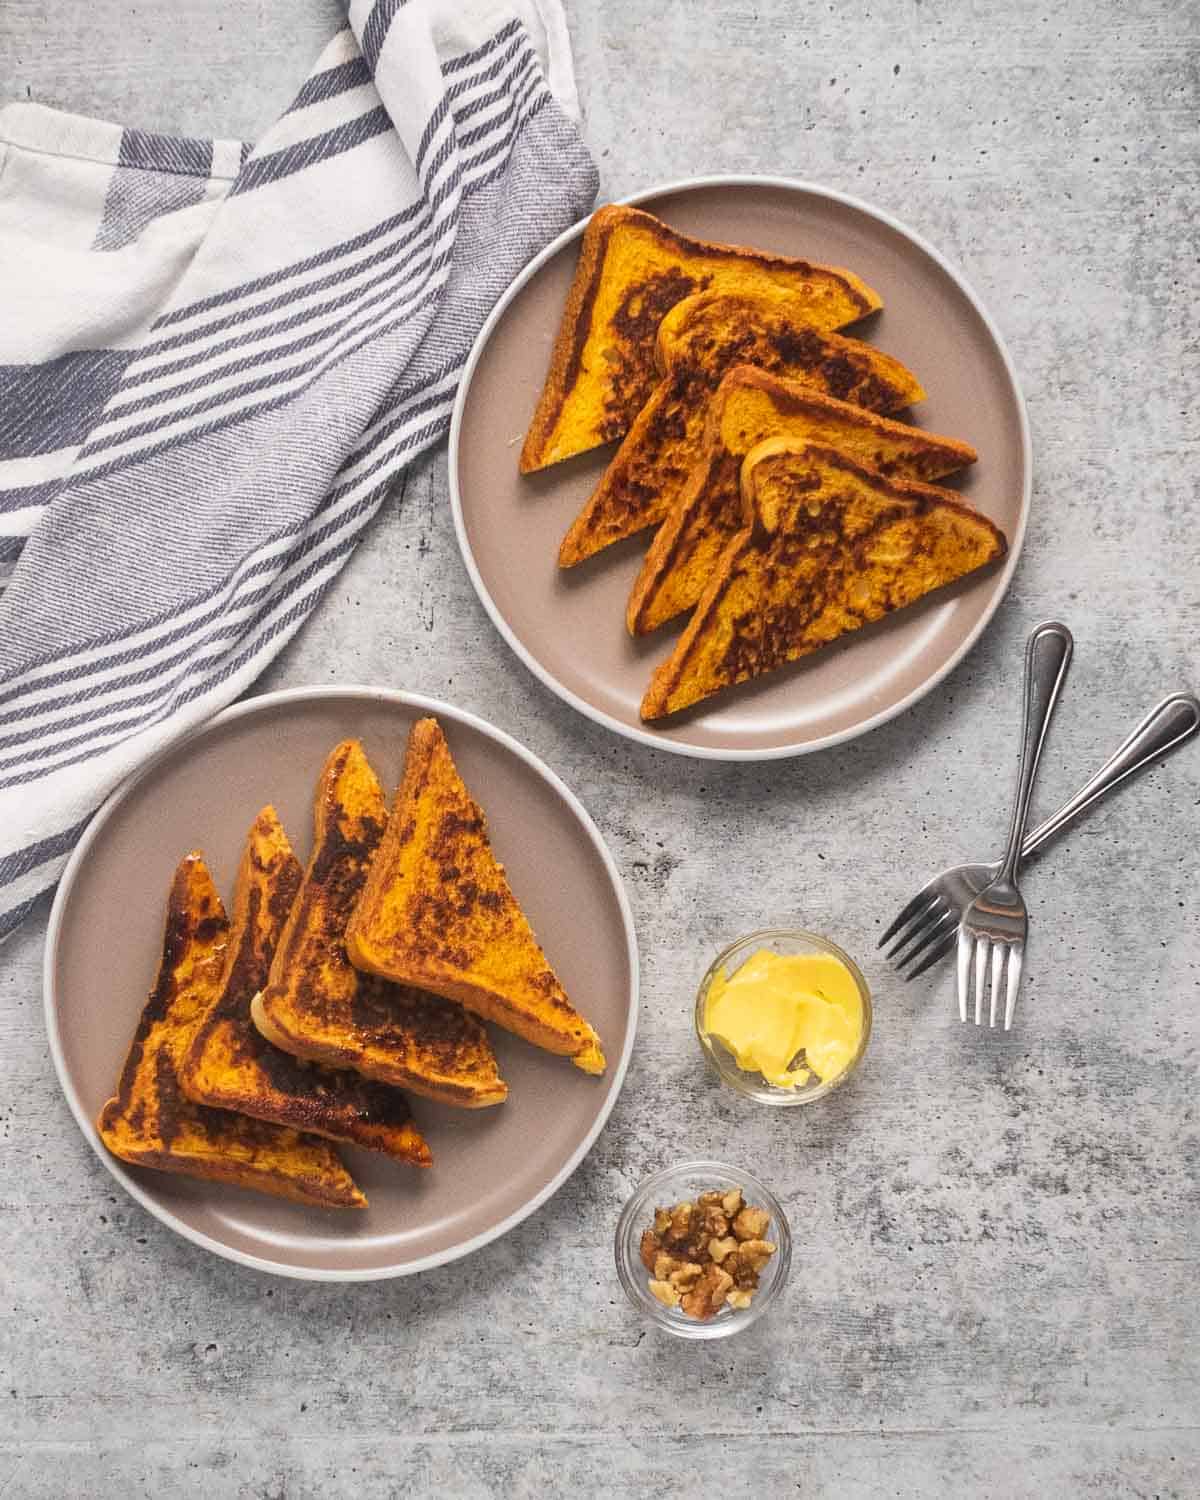 Two plates with pumpkin French toast wedges, two forks, butter, and chopped walnuts.